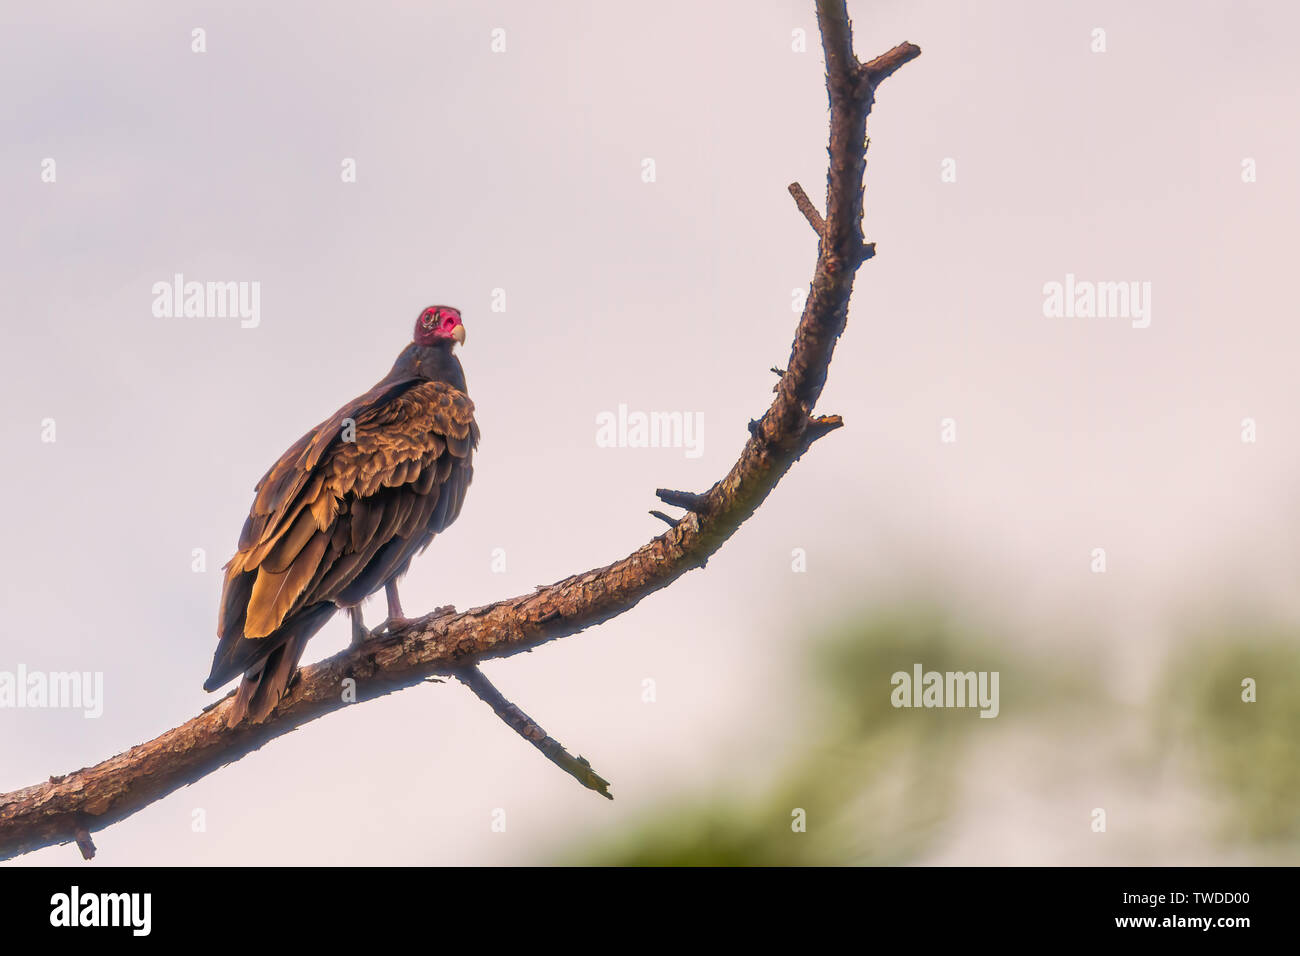 Turkey vulture perched on pine tree branch in Panama City, Florida Stock Photo